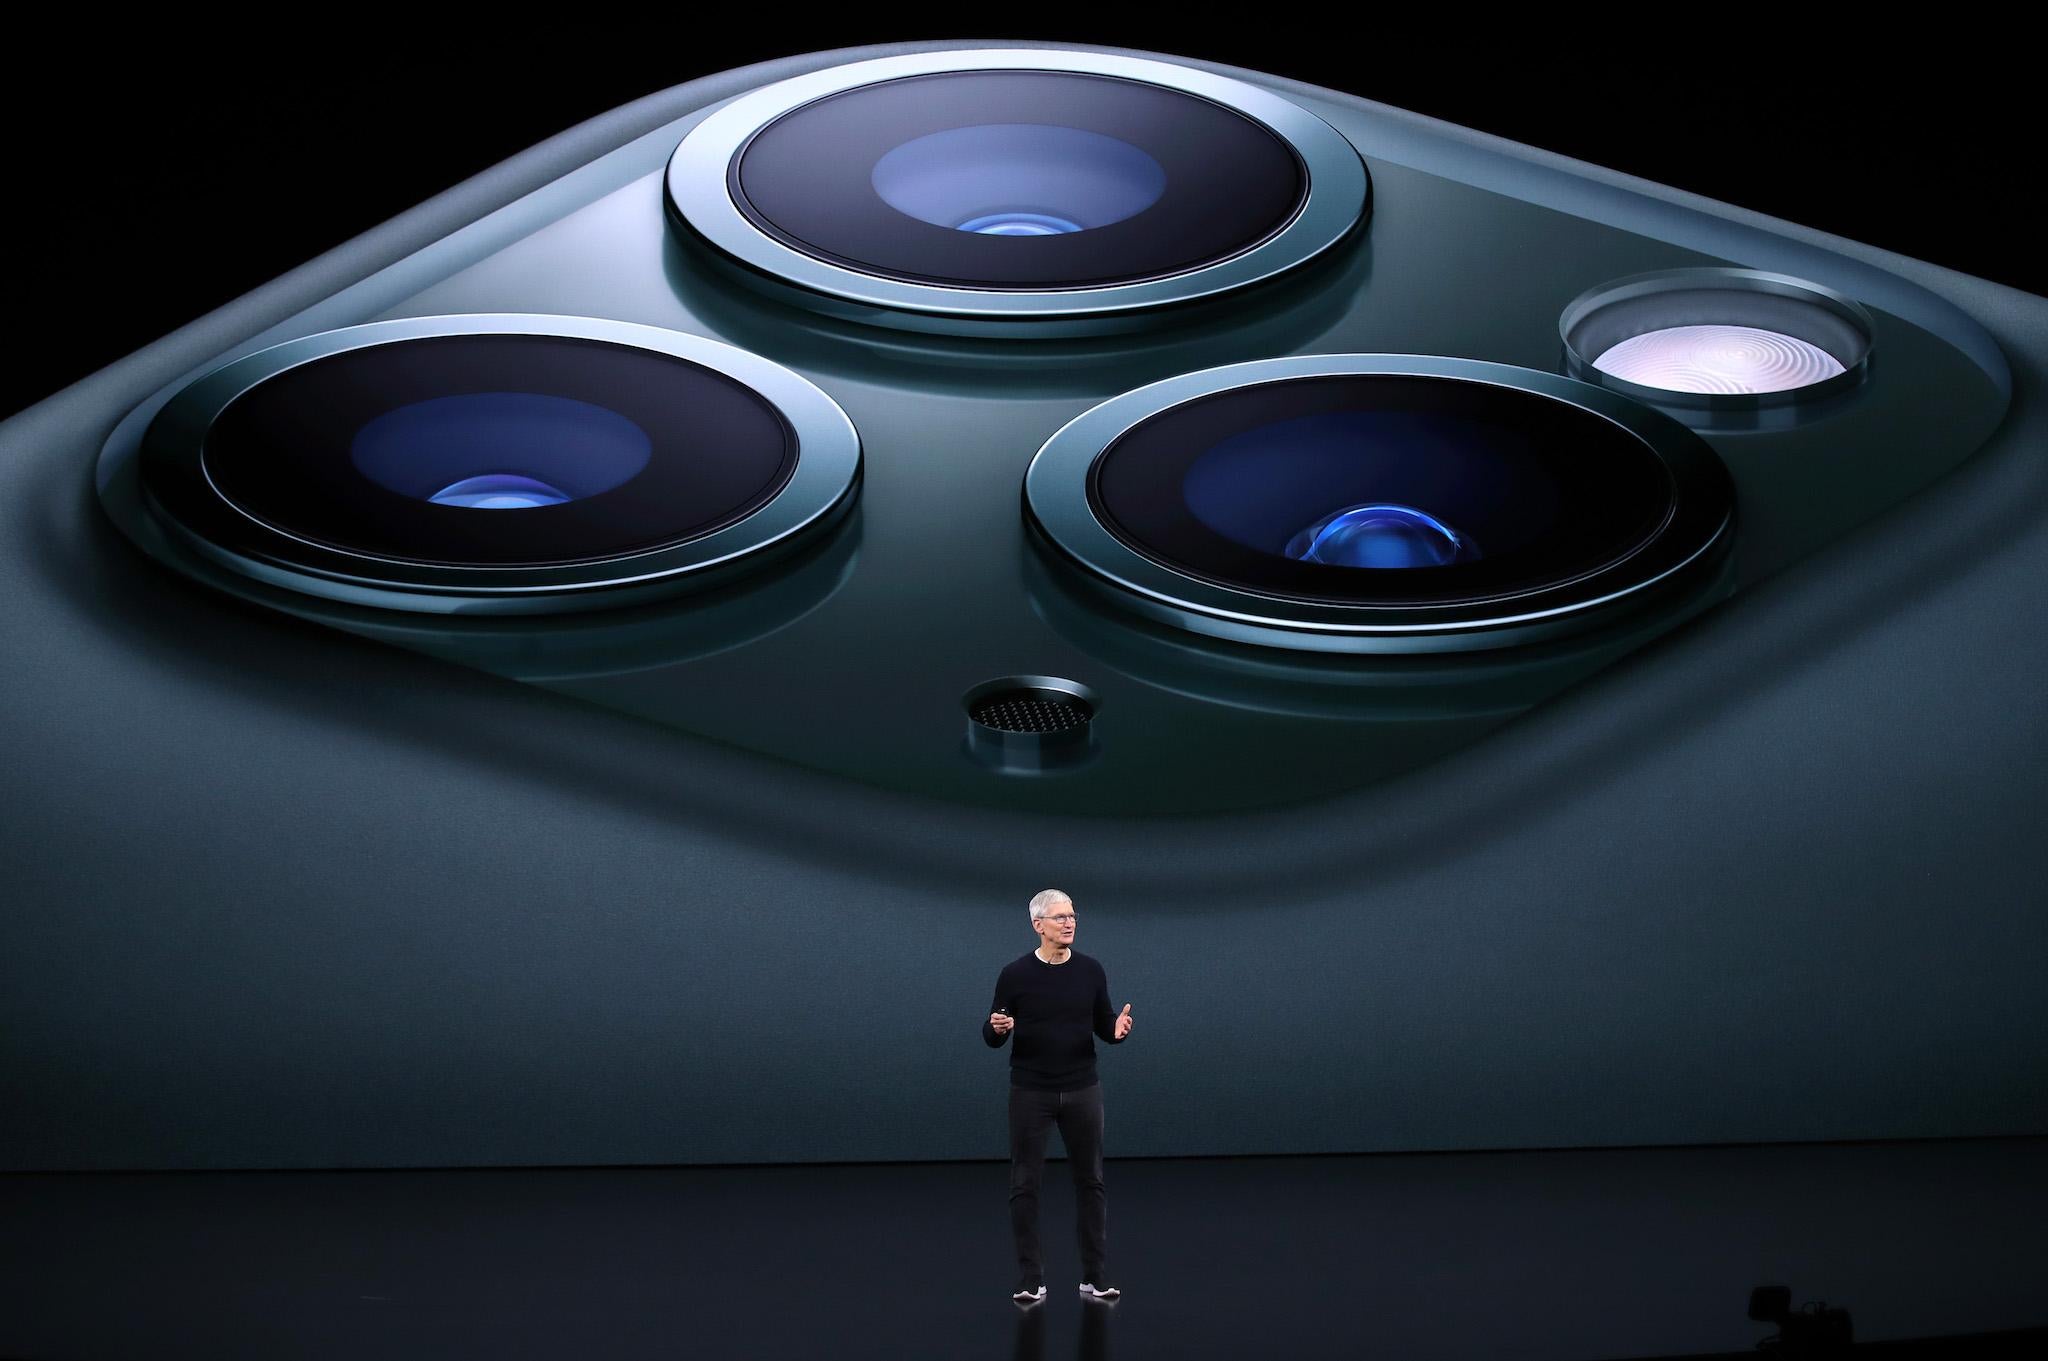 Apple's senior vice president of worldwide marketing Phil Schiller talks about the new iPhone 11 Pro during a special event on September 10, 2019 in the Steve Jobs Theater on Apple's Cupertino, California campus